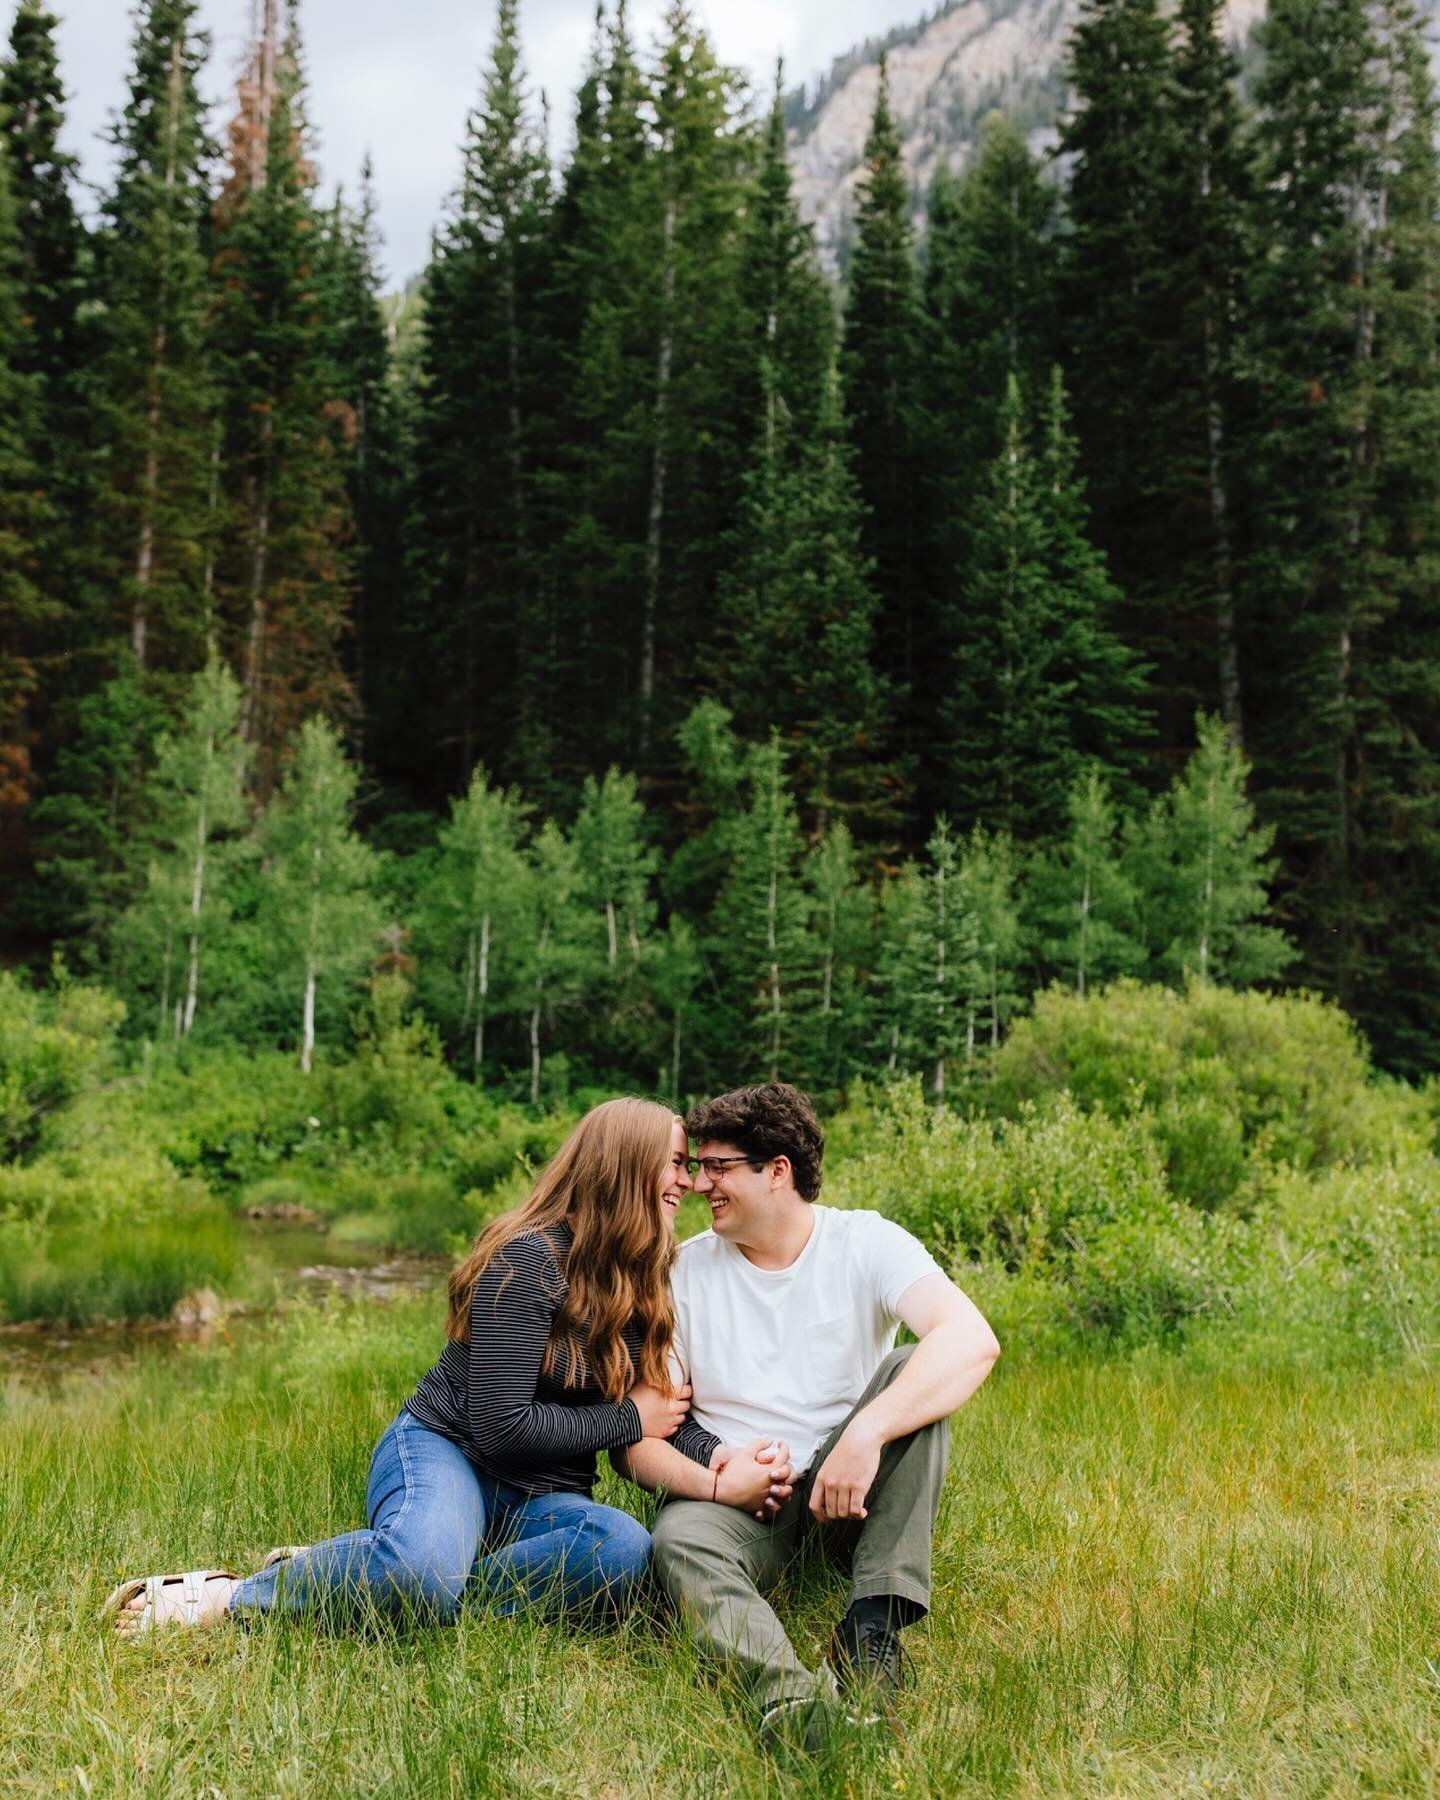 So excited for the mountains to be green again. 🌲

#utahweddingphotographer #utahengagementphotographer #utahengagements #engaged #engaged💍 #engagedlife #utahelopementphotographer #coloradoweddingphotographer #montanaweddingphotographer #idahoweddi